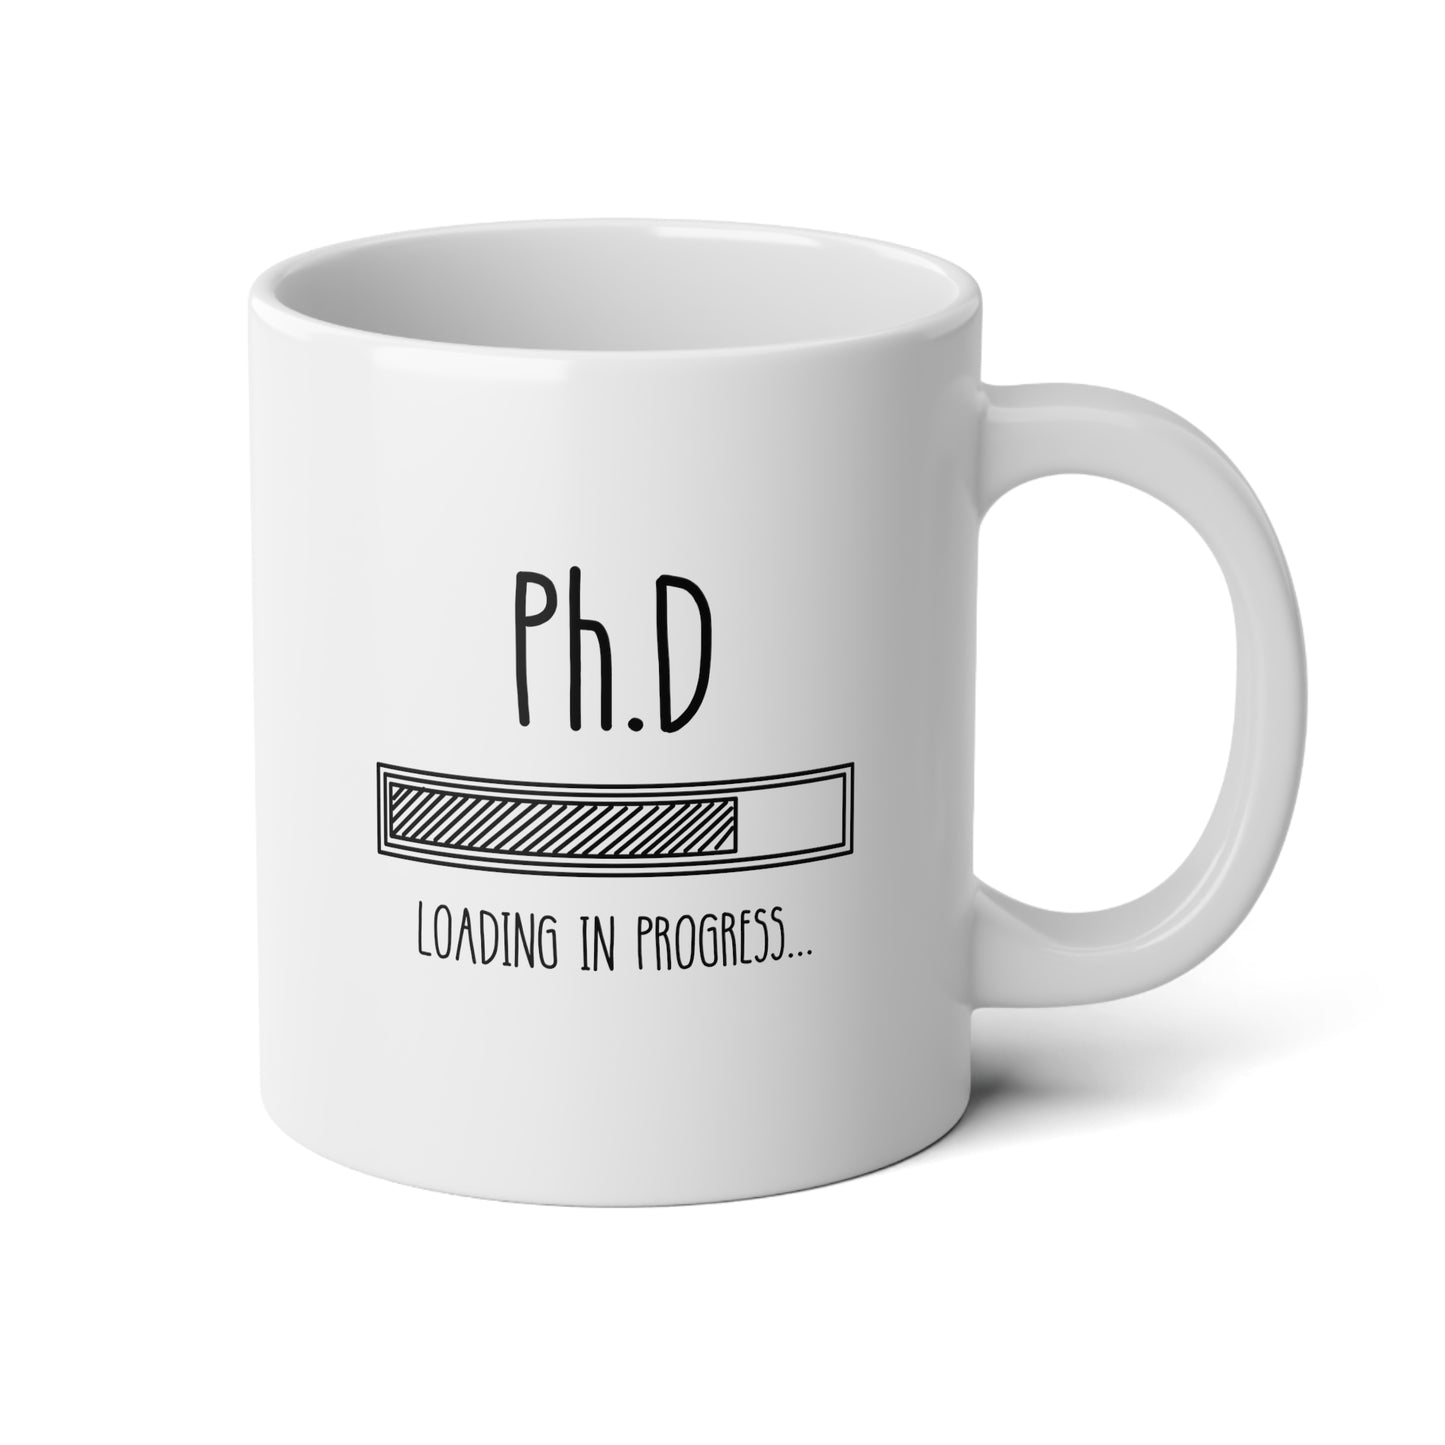 Ph.D Loading 20oz white funny large coffee mug gift for doctor PhD degree student graduation personalized wavey wares wavywares wavy wares